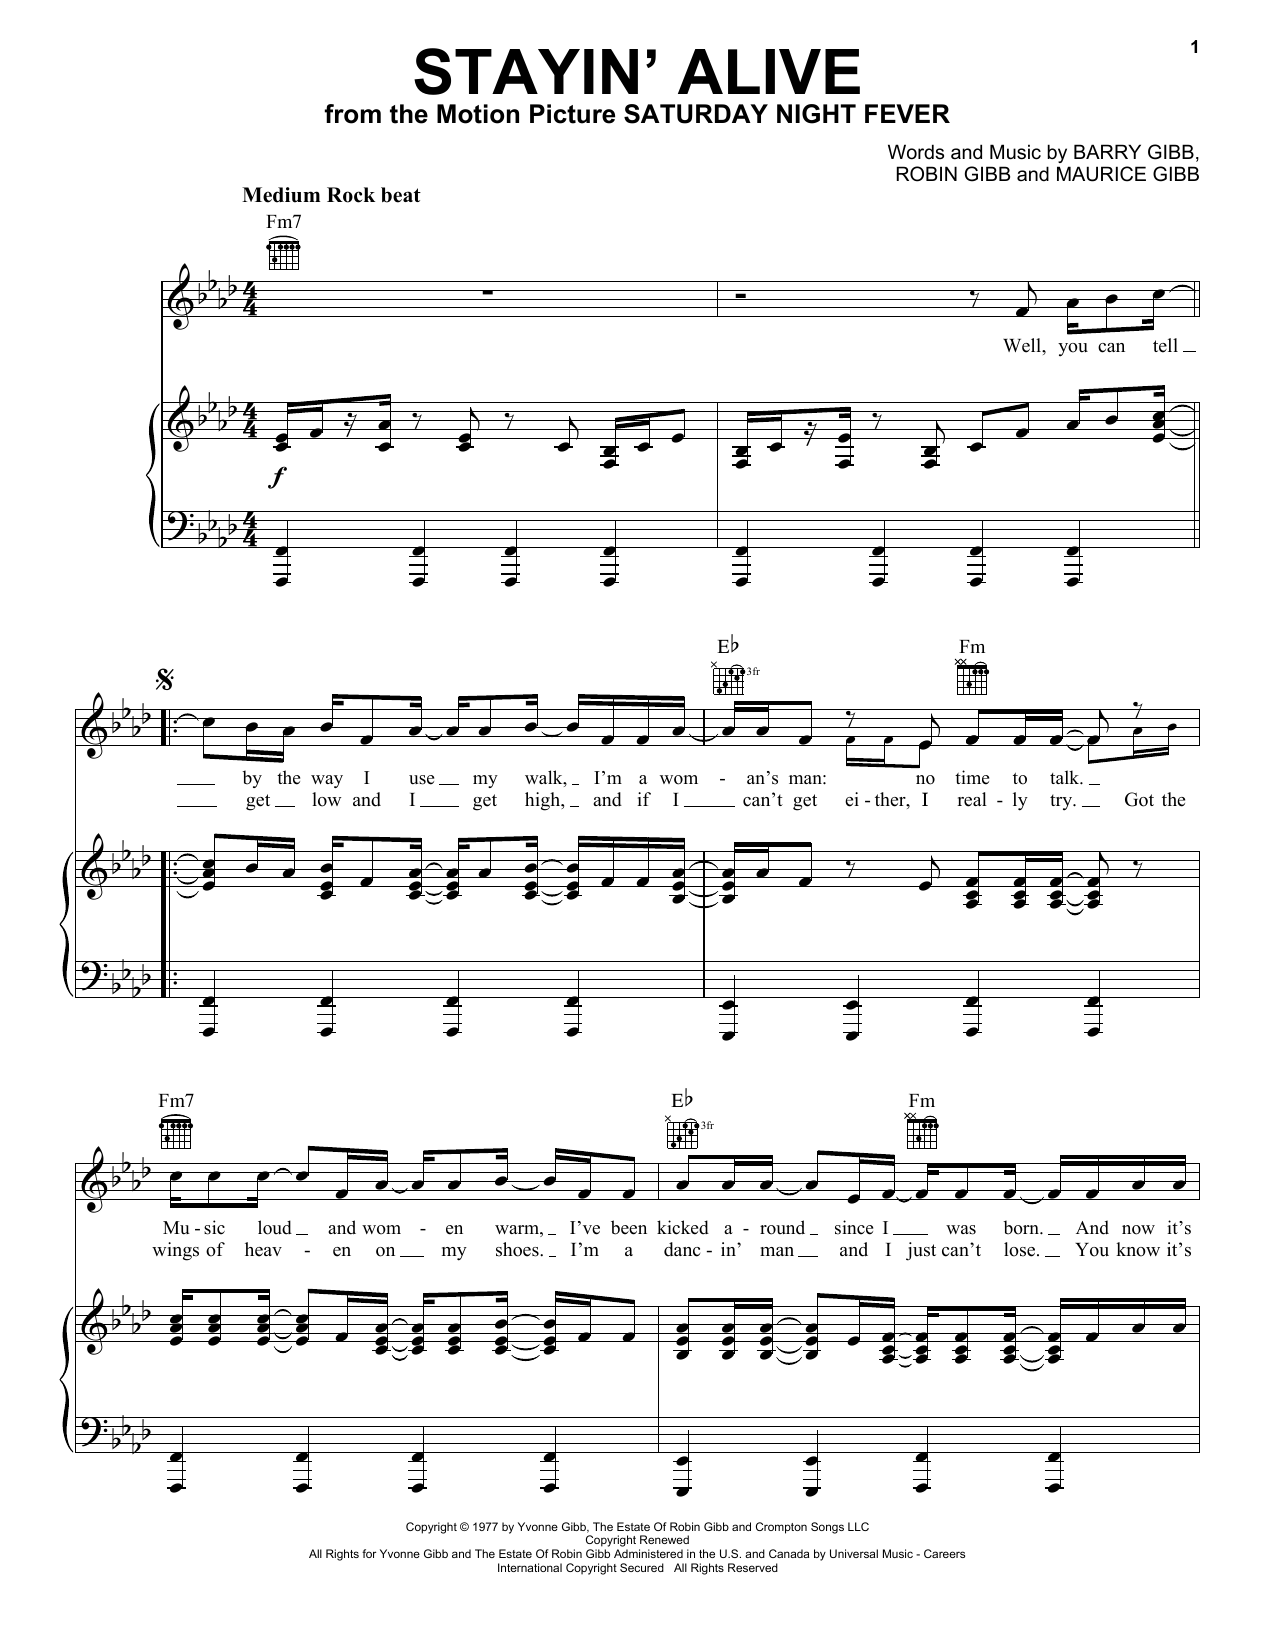 Download Bee Gees Stayin' Alive Sheet Music